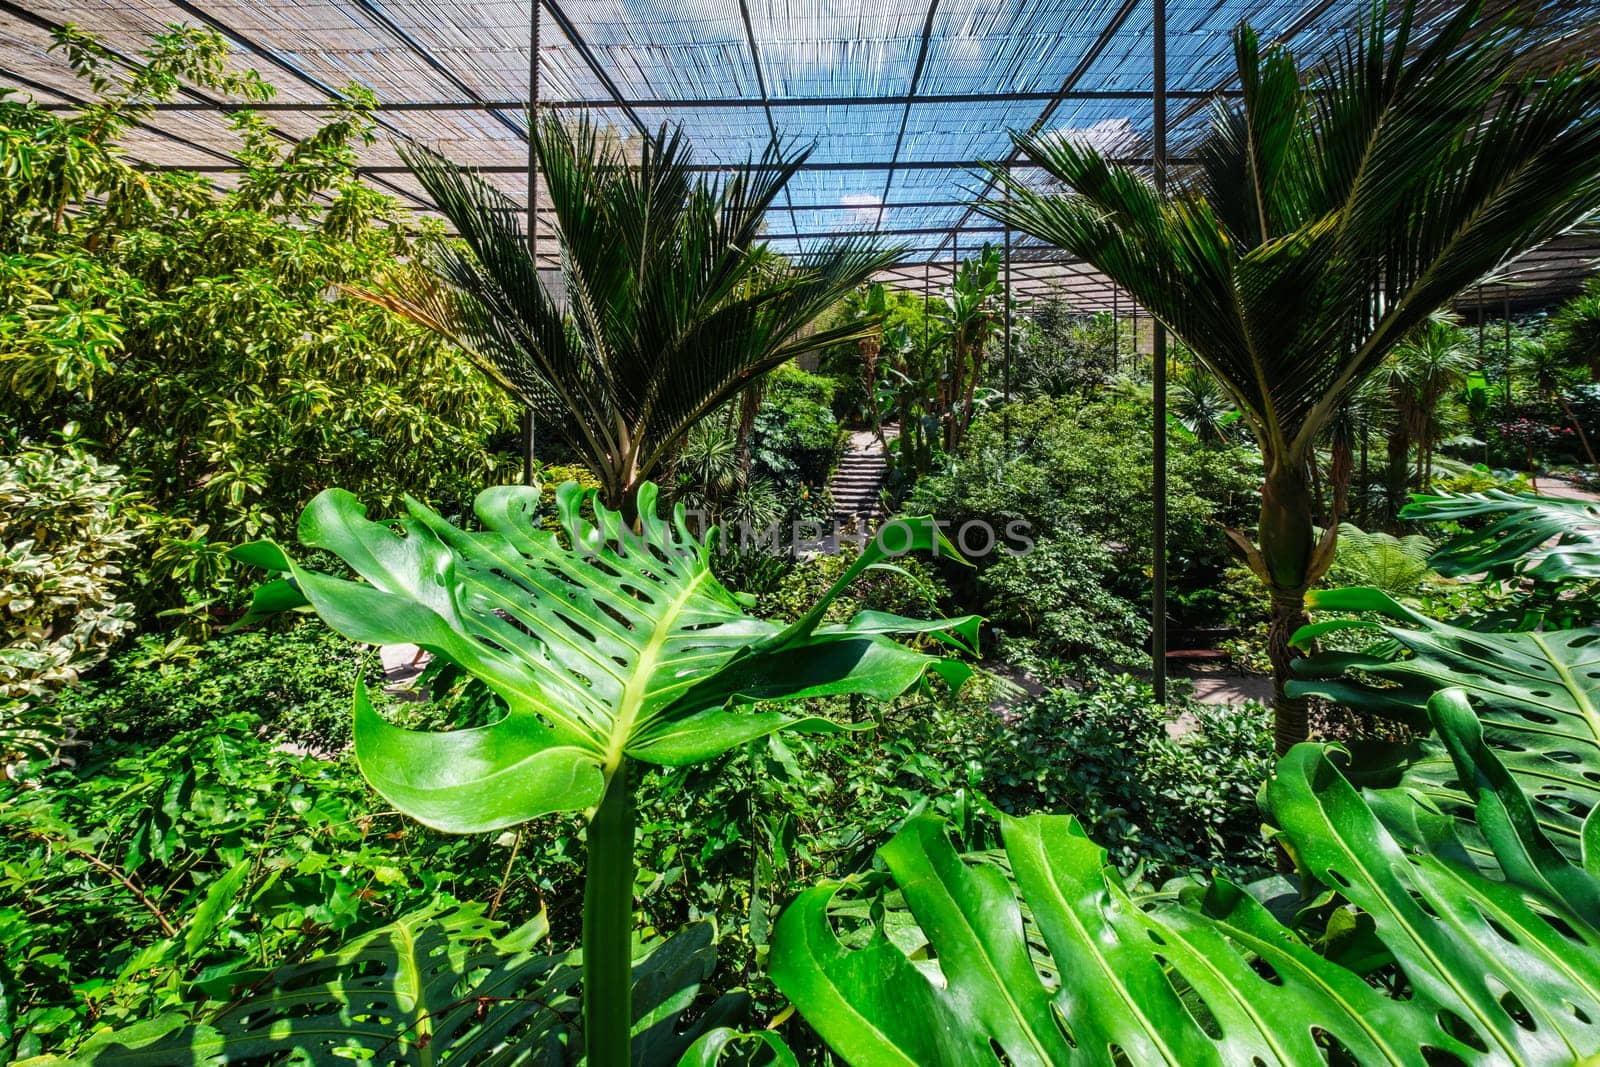 The cold house Estufa Fria is a greenhouse with gardens, ponds, plants and trees in Lisbon, Portugal by dimol